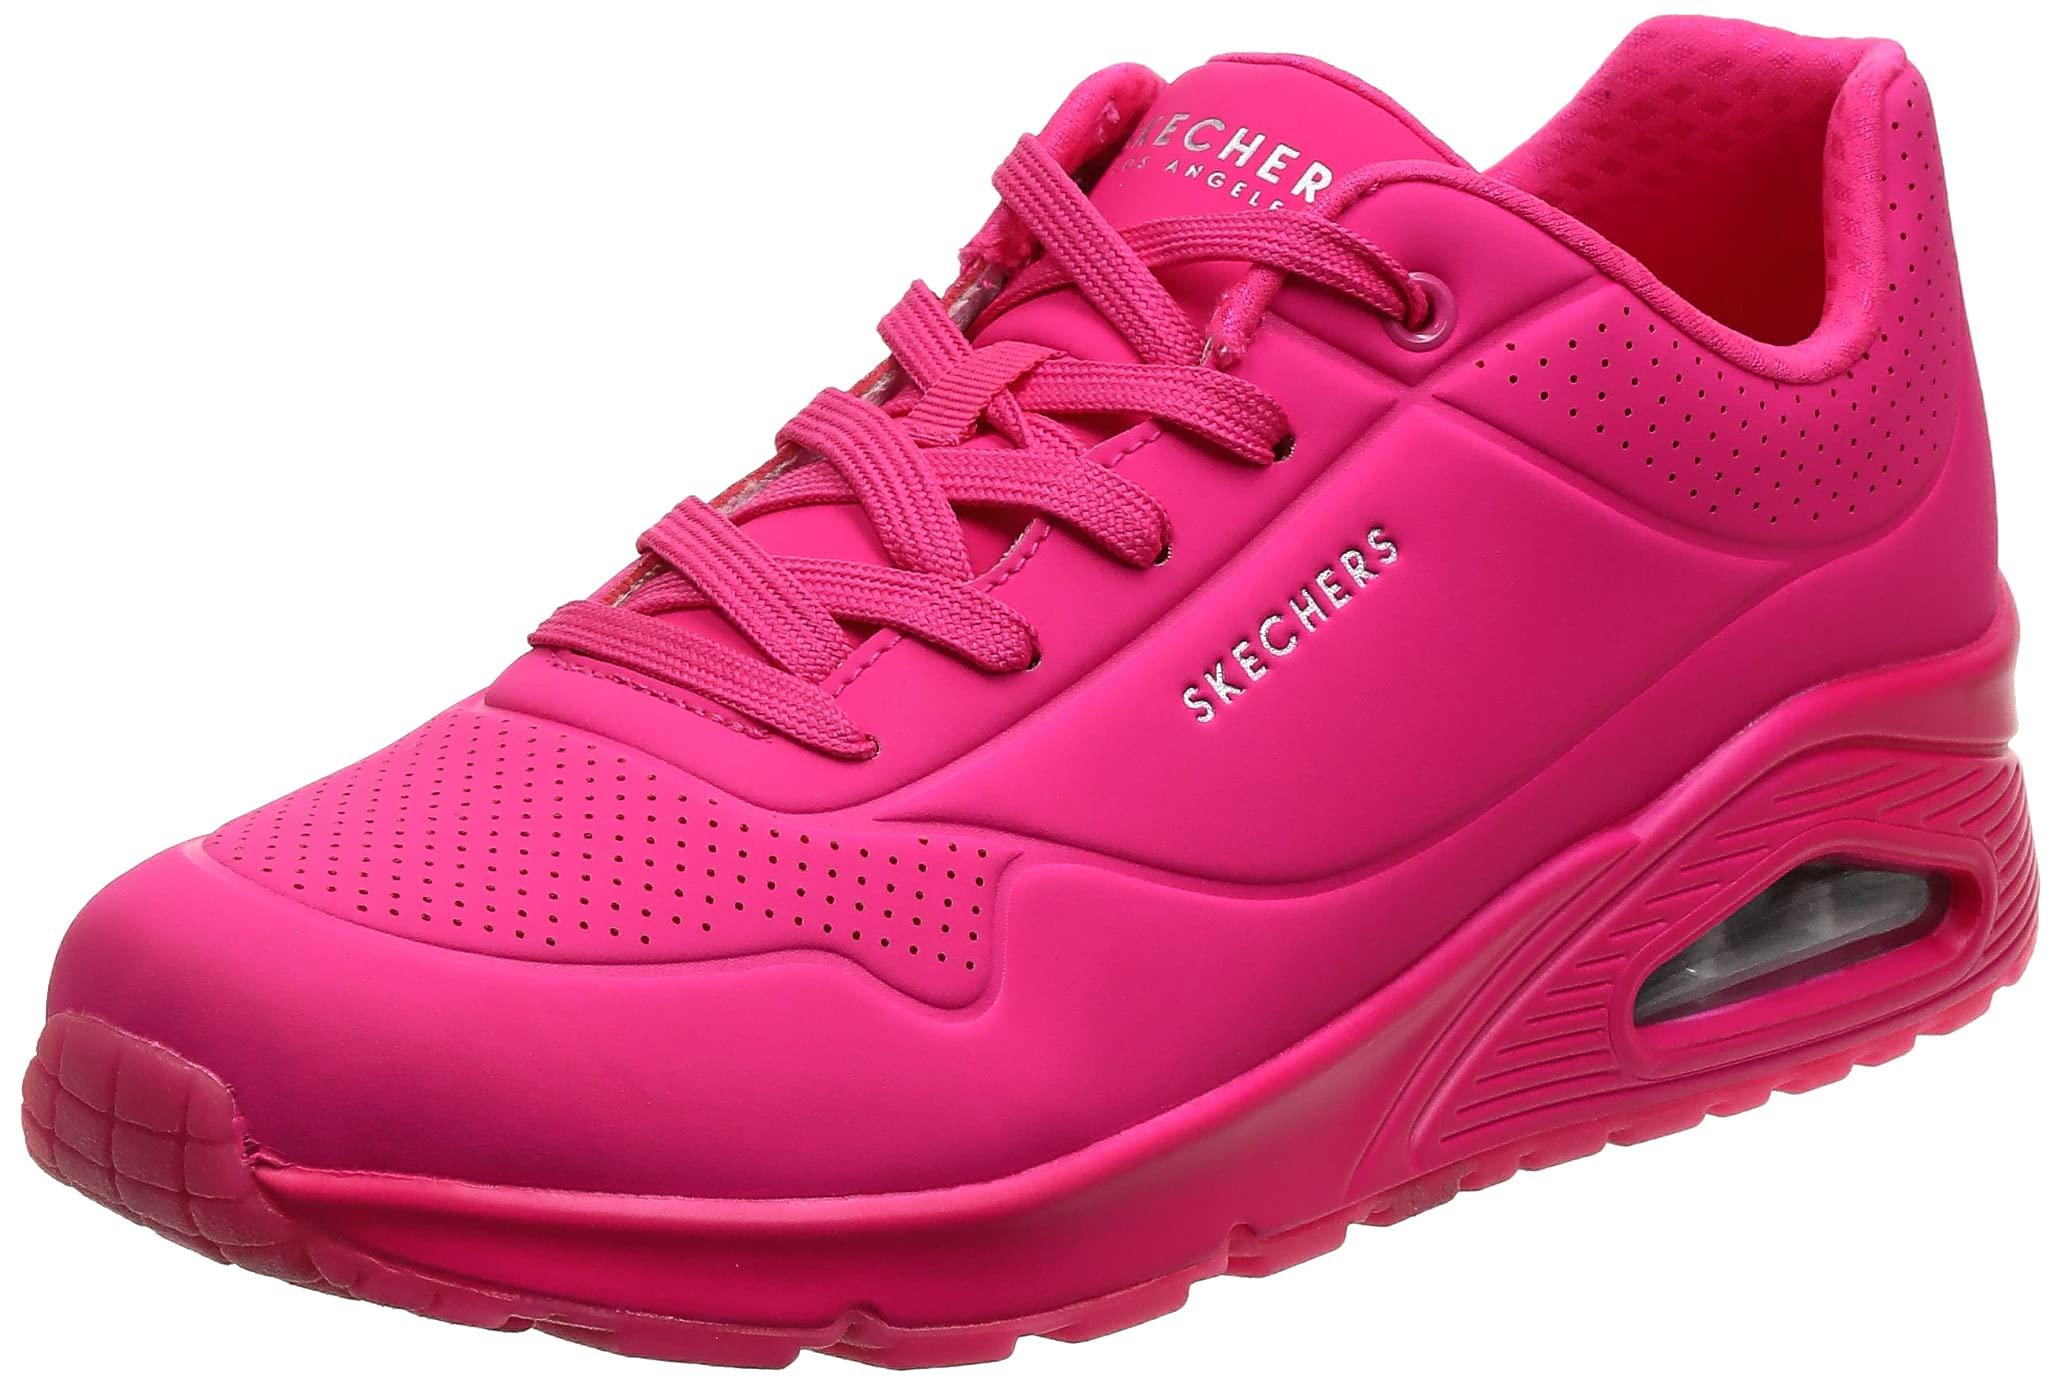 Skechers Night Shades in Hot Pink (Pink) - Save 16% - Lyst